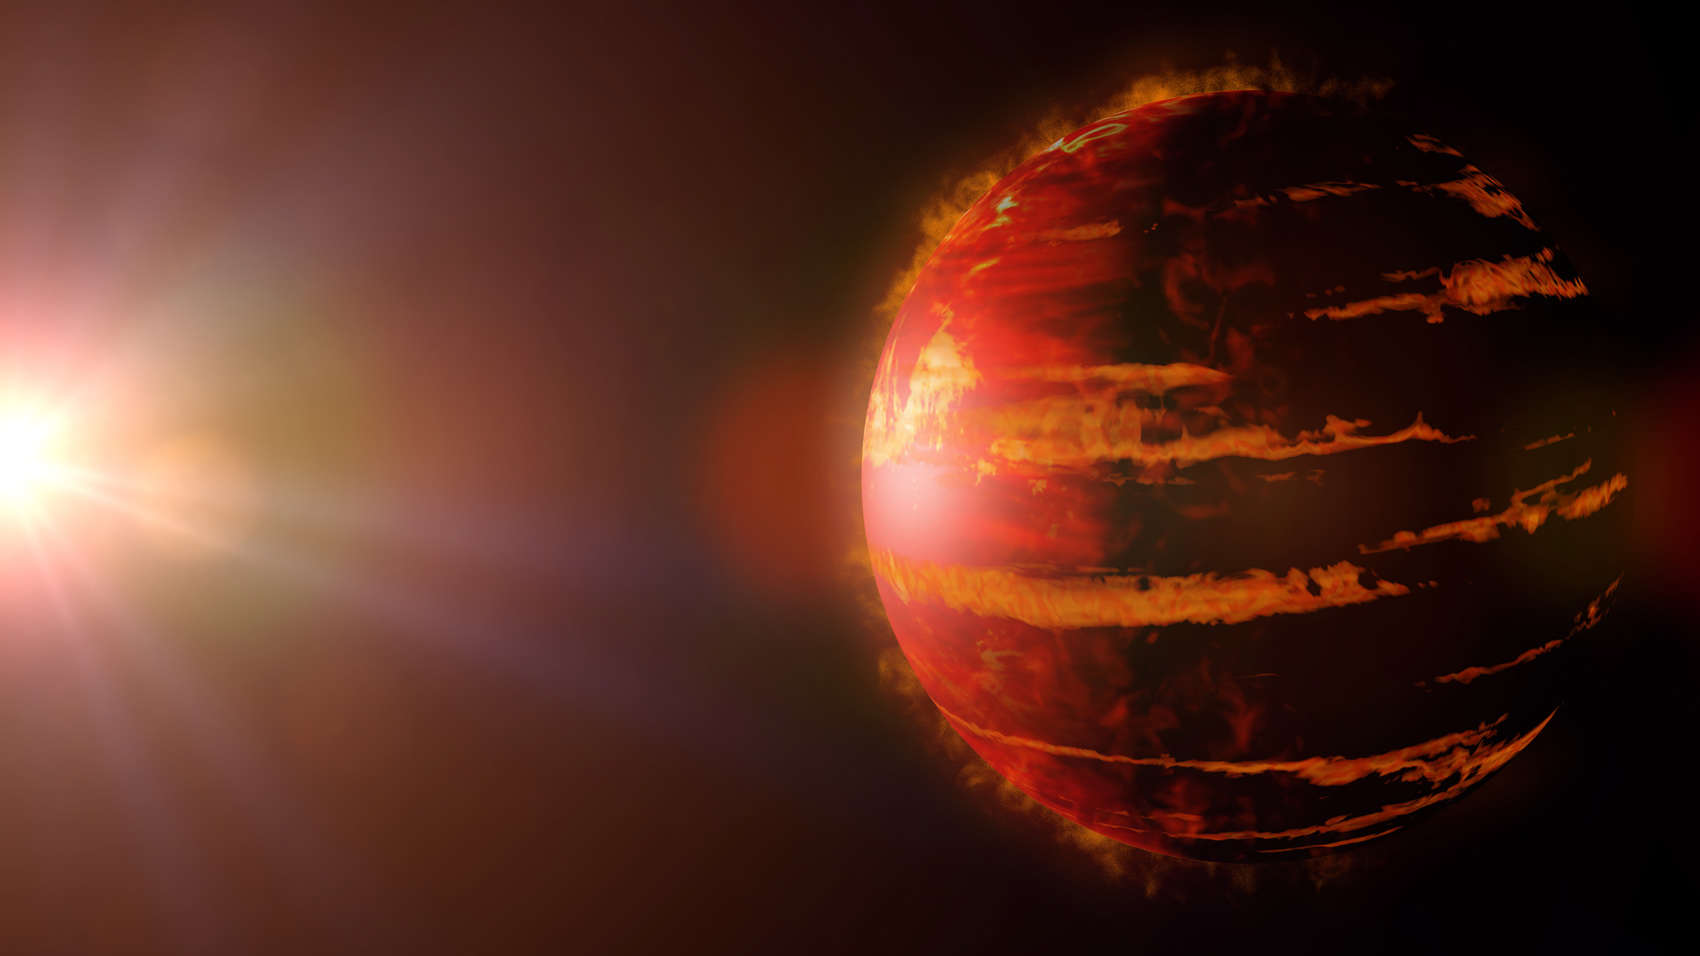 Artwork depicting a hot, young, gas giant exoplanet still in the process of formation. Credit: dottedhippo / iStock / Getty Images Plus